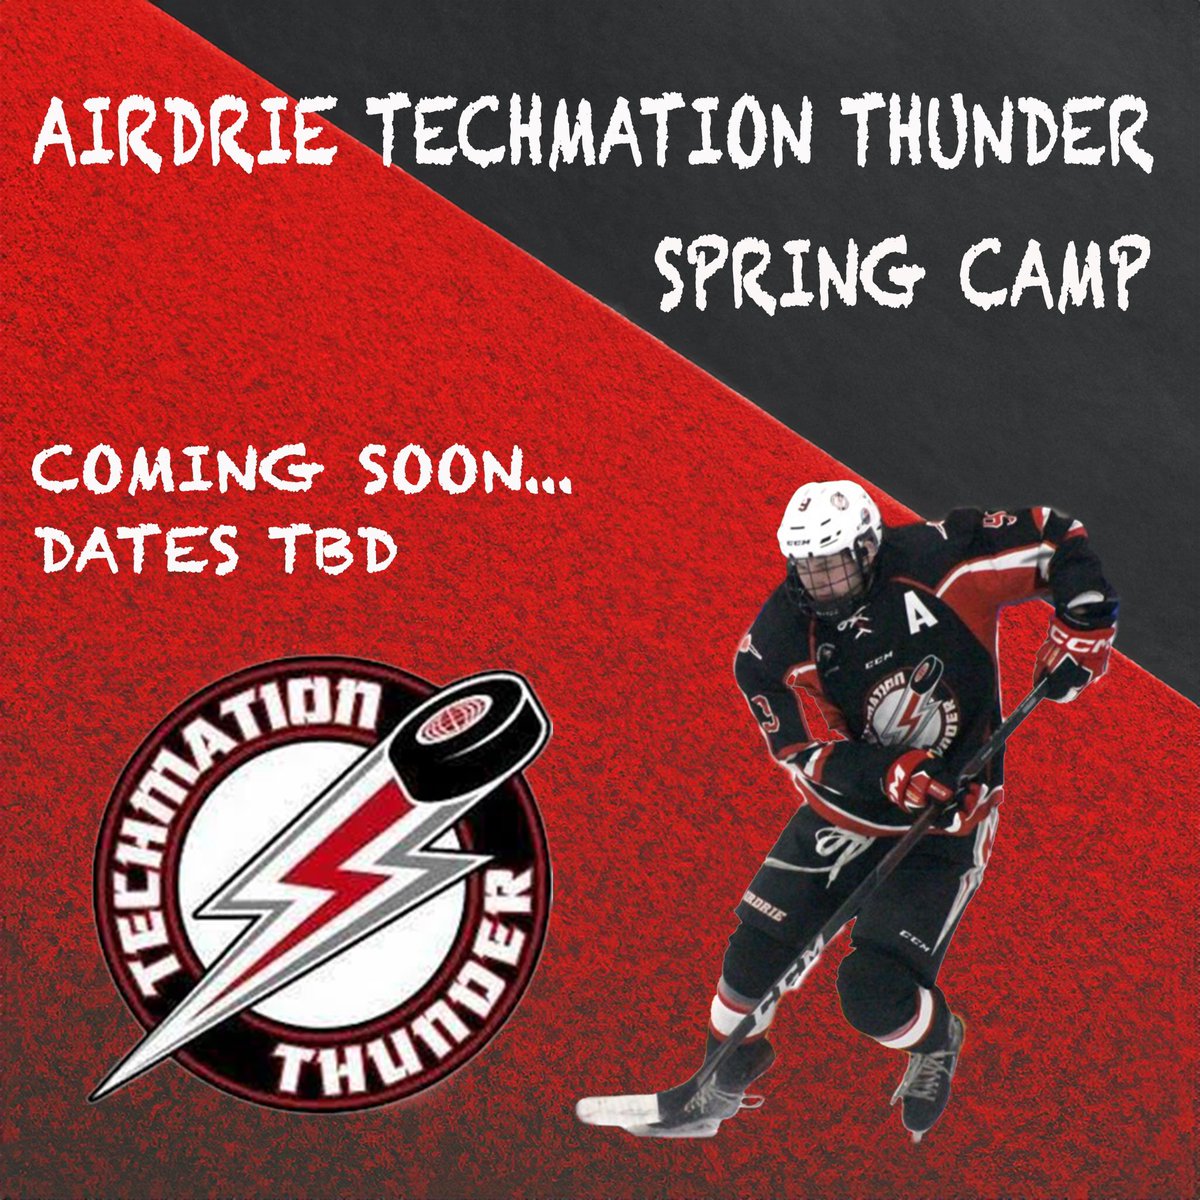 Stay tuned for your Airdrie Techmation Thunder spring camp!! Dates: TBD. You won’t want to miss it 🌩️🏒 #airdriethunder